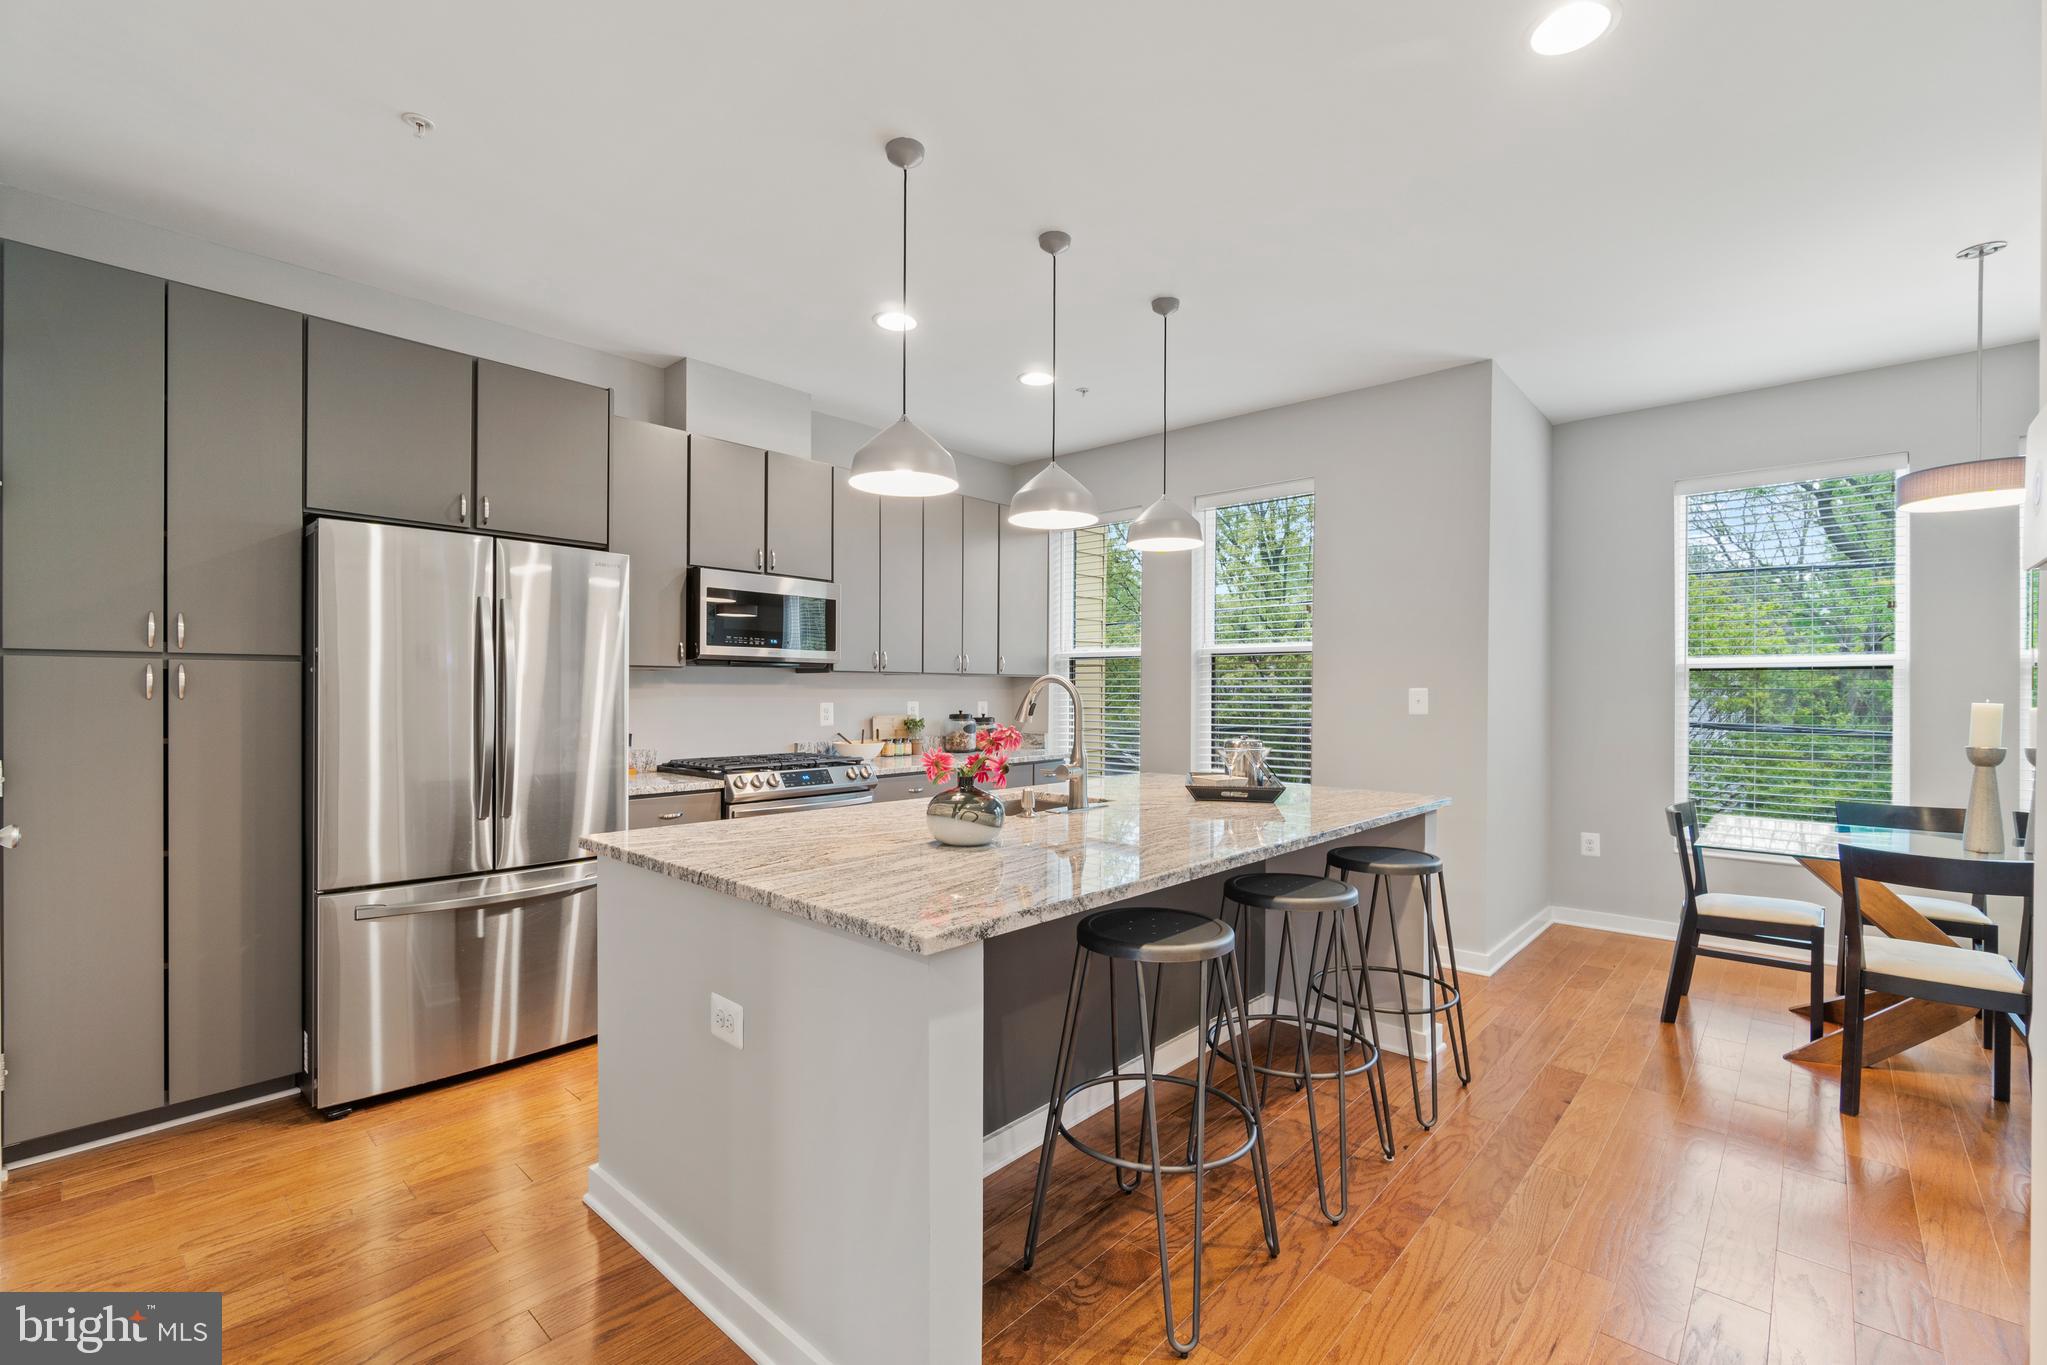 a kitchen with stainless steel appliances a table chairs refrigerator and wooden floor